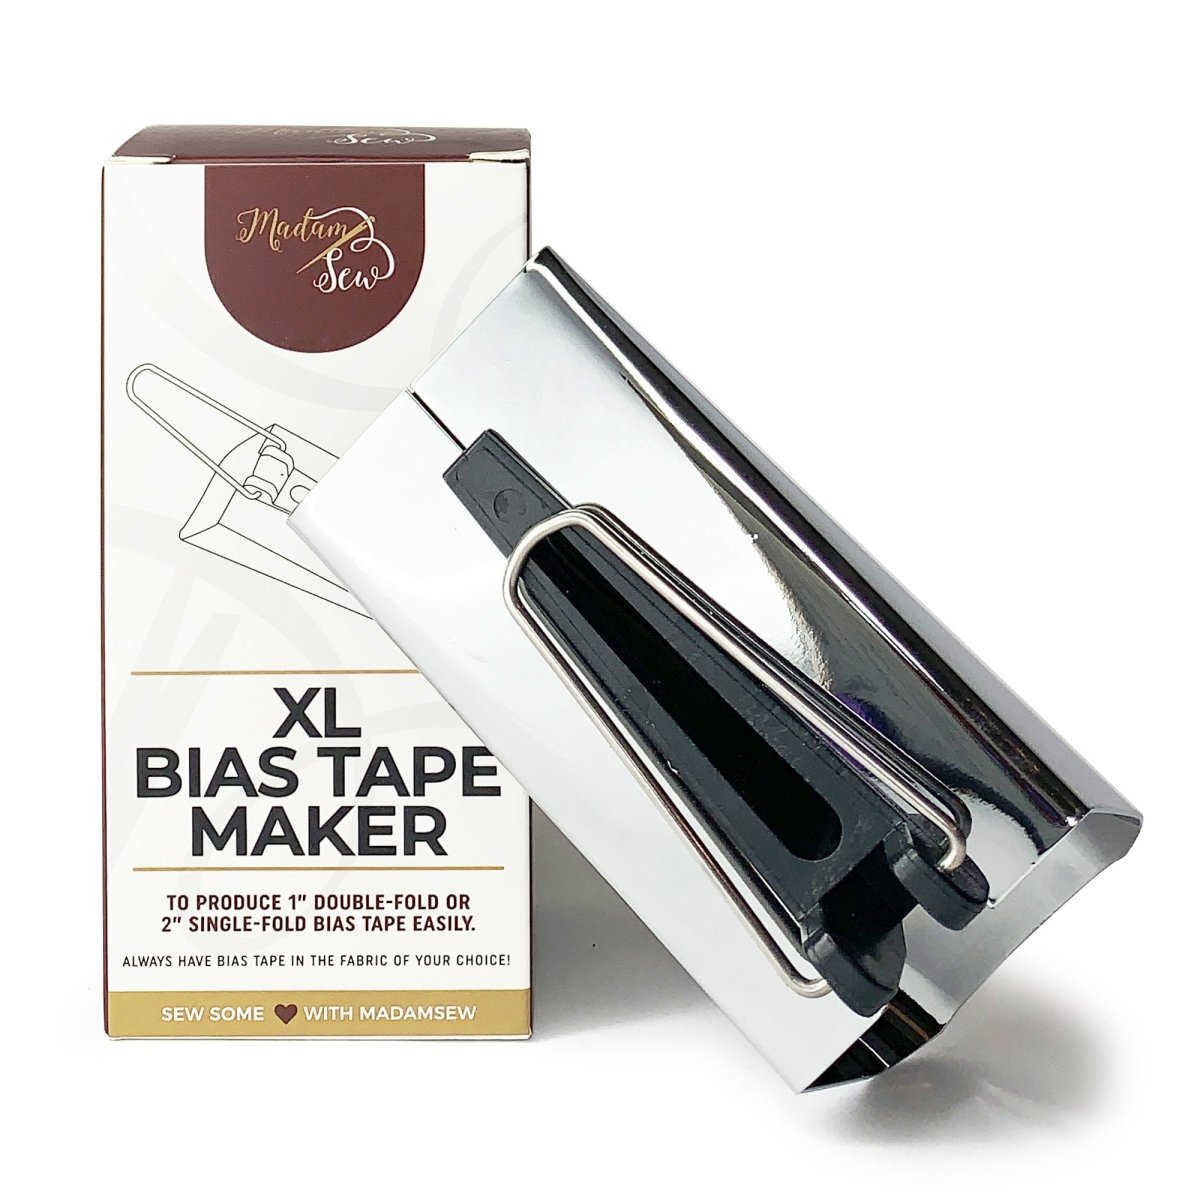 Dritz 1/2 inch and 1 inch Bias Tape Makers, 2 pc